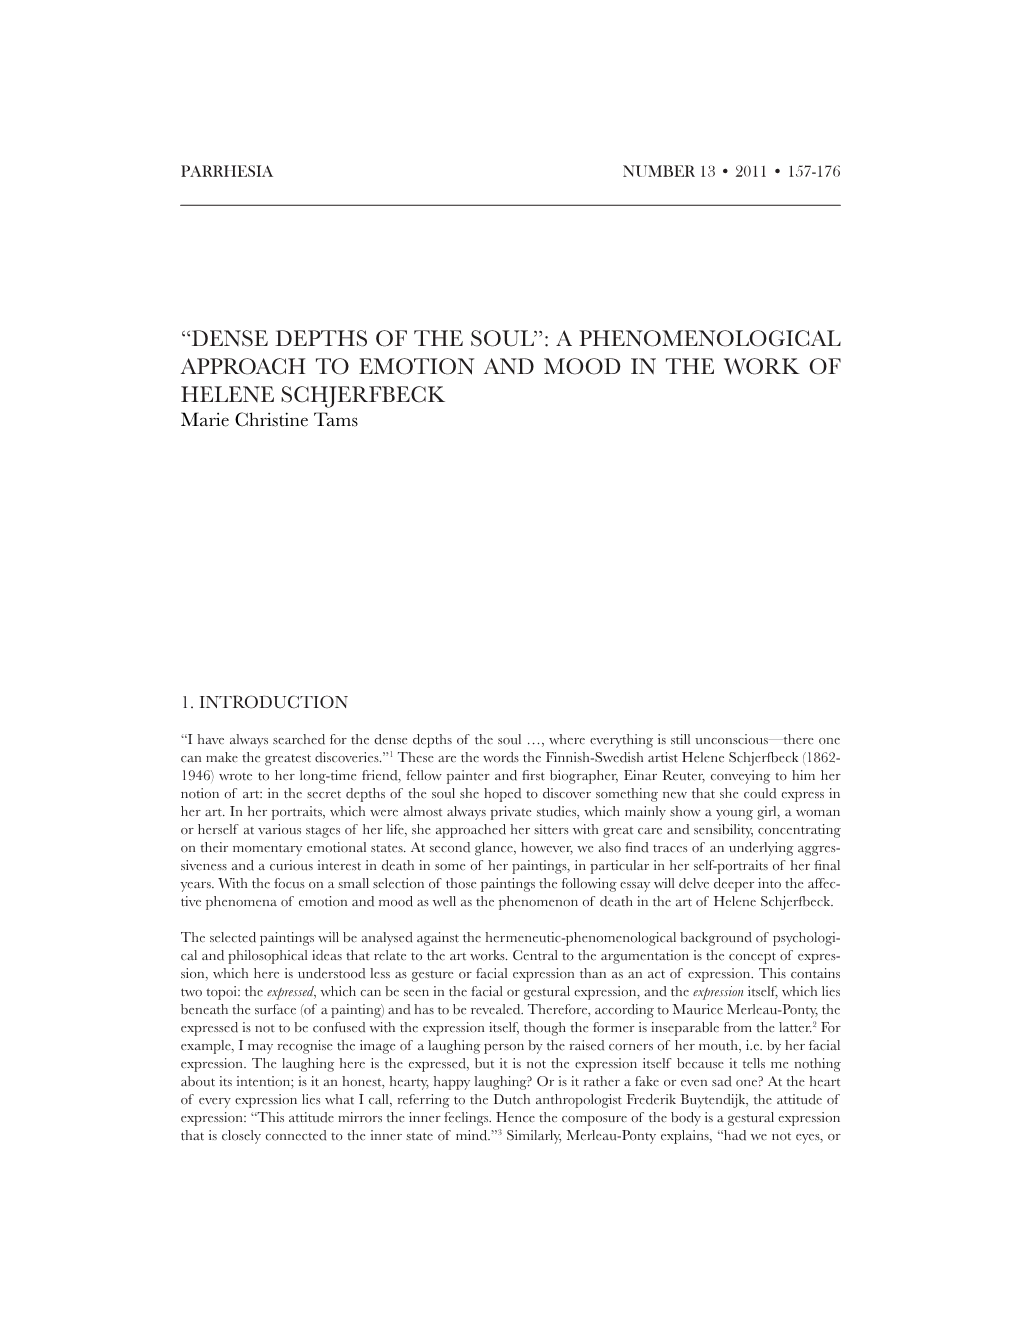 “DENSE DEPTHS of the SOUL”: a PHENOMENOLOGICAL APPROACH to EMOTION and MOOD in the WORK of HELENE SCHJERFBECK Marie Christine Tams